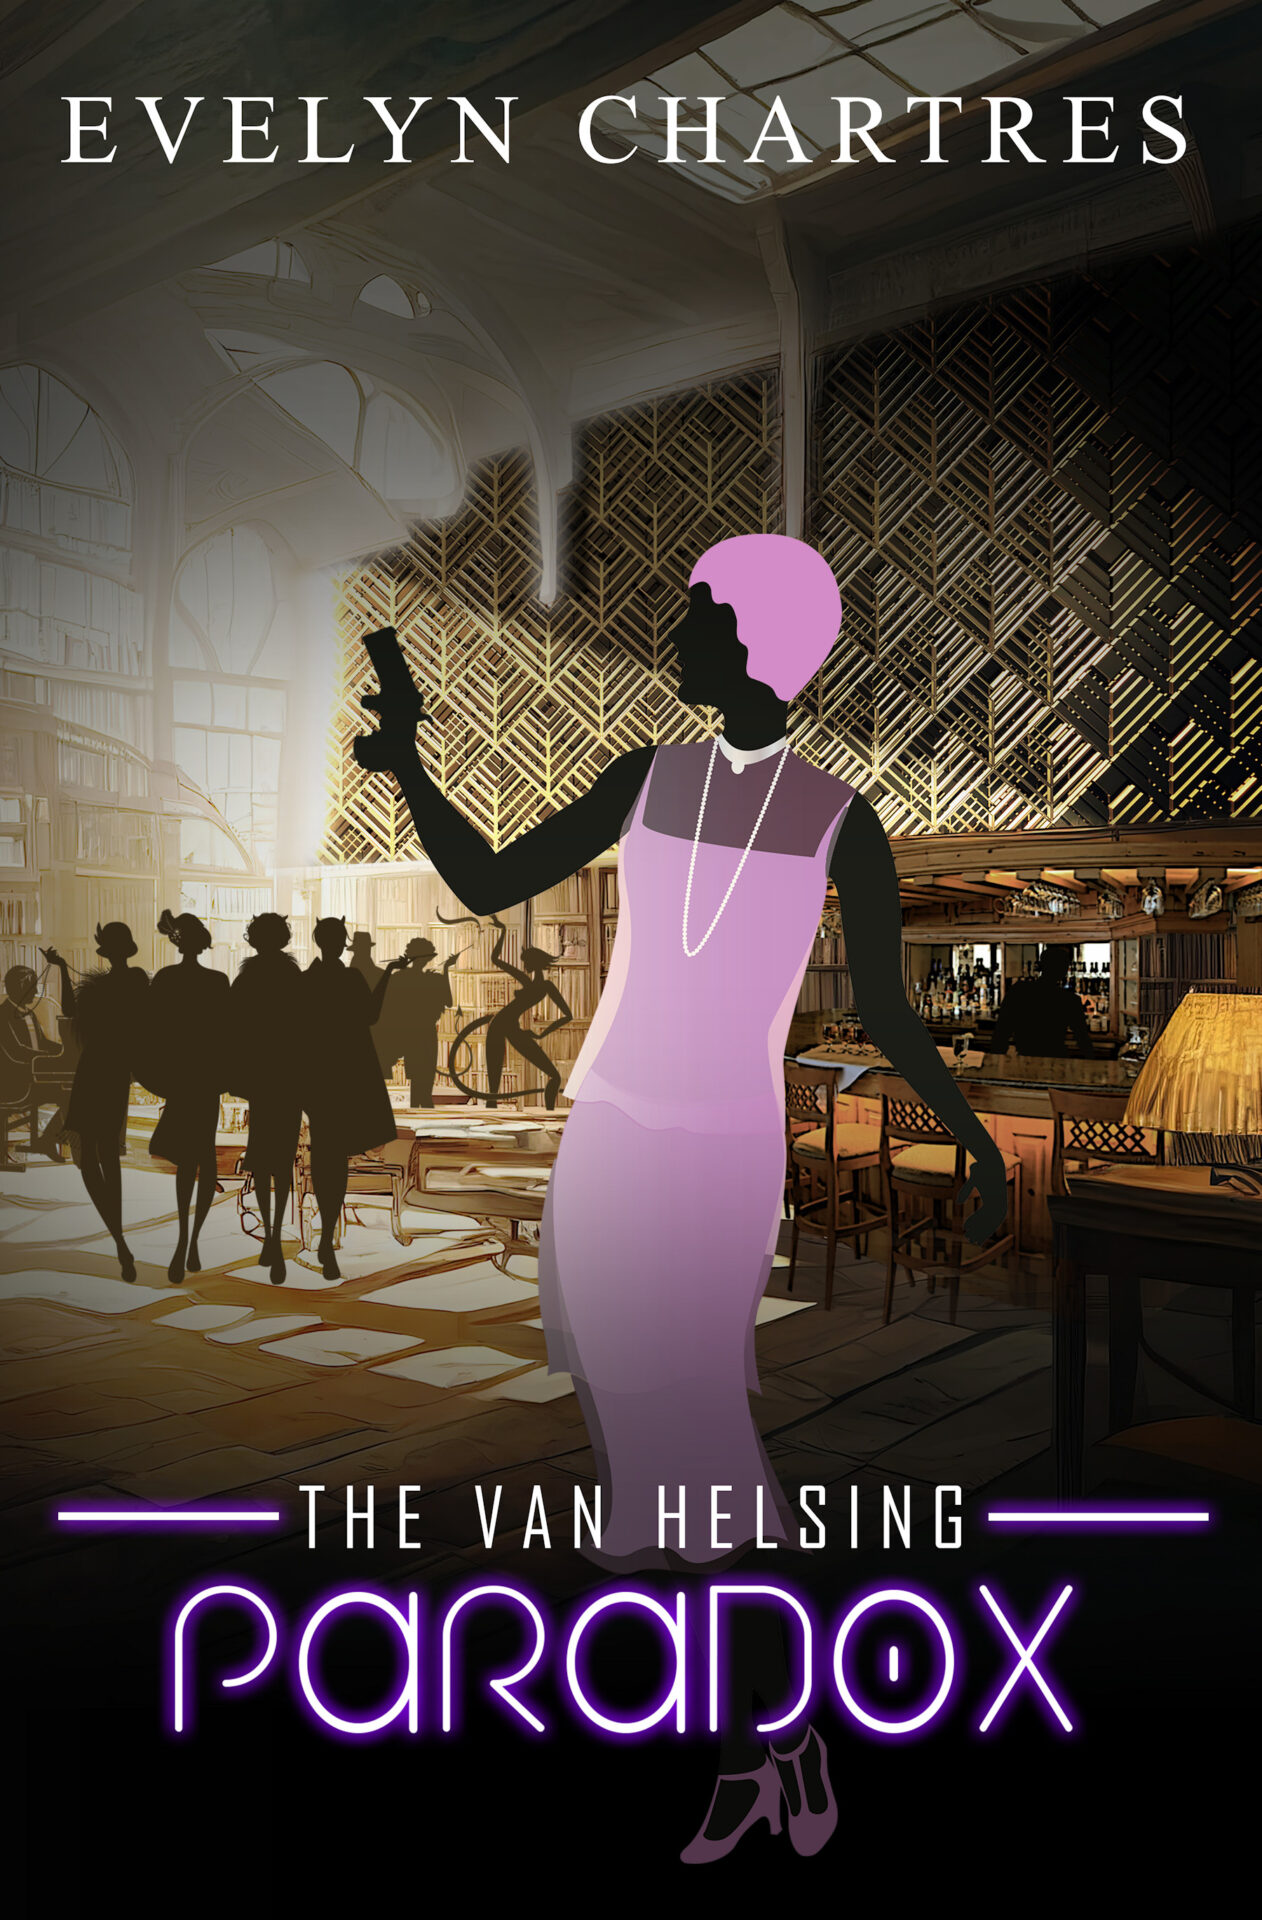 The Van Helsing Paradox by Evelyn Chartres